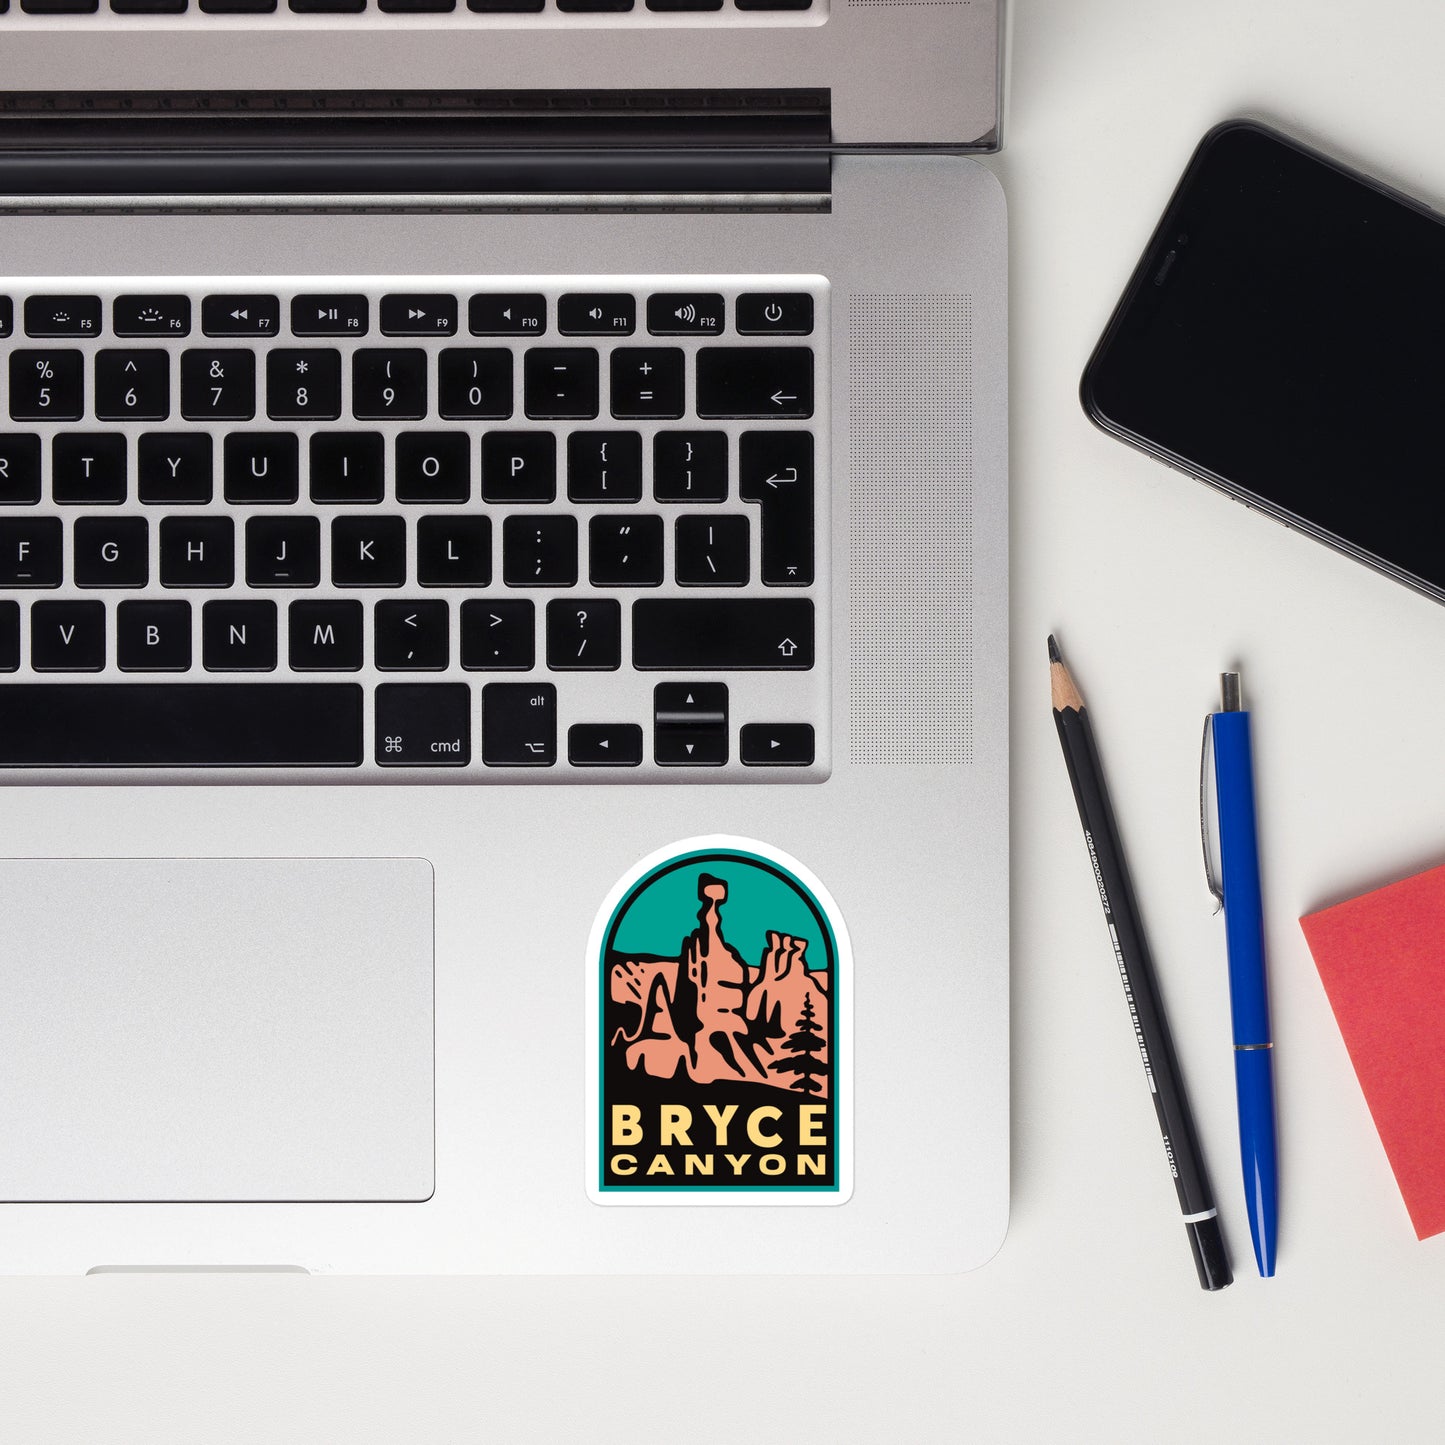 A sticker of Bryce Canyon on a laptop